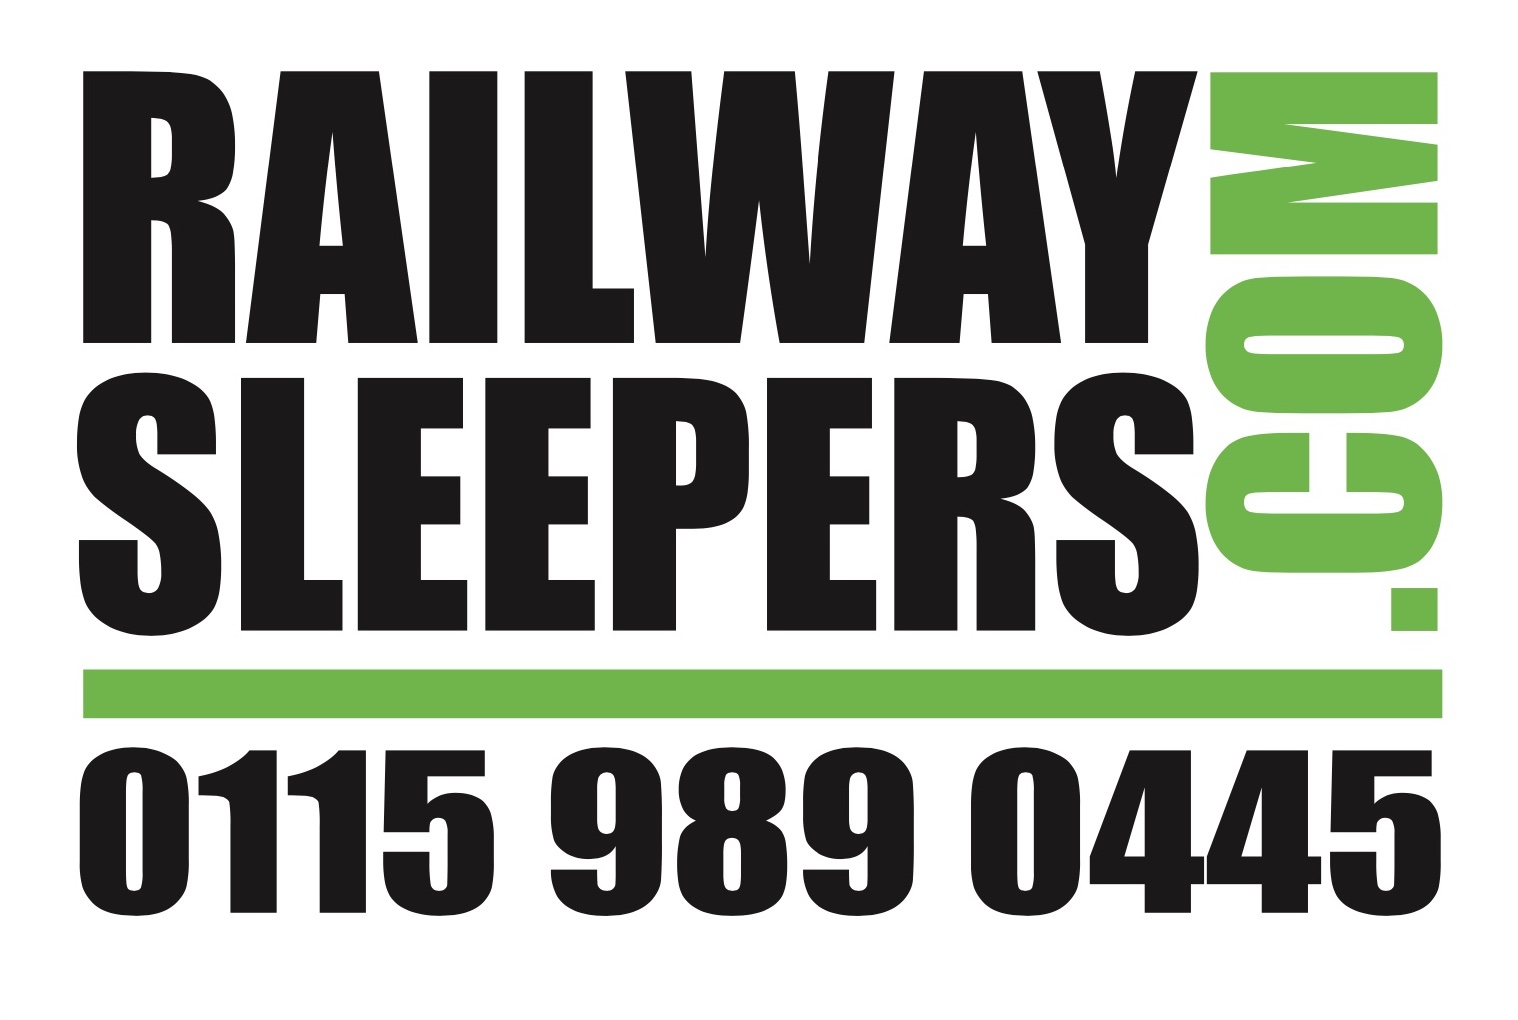 Delivering railway sleepers throughout the UK since 1997. Railwaysleepers.com